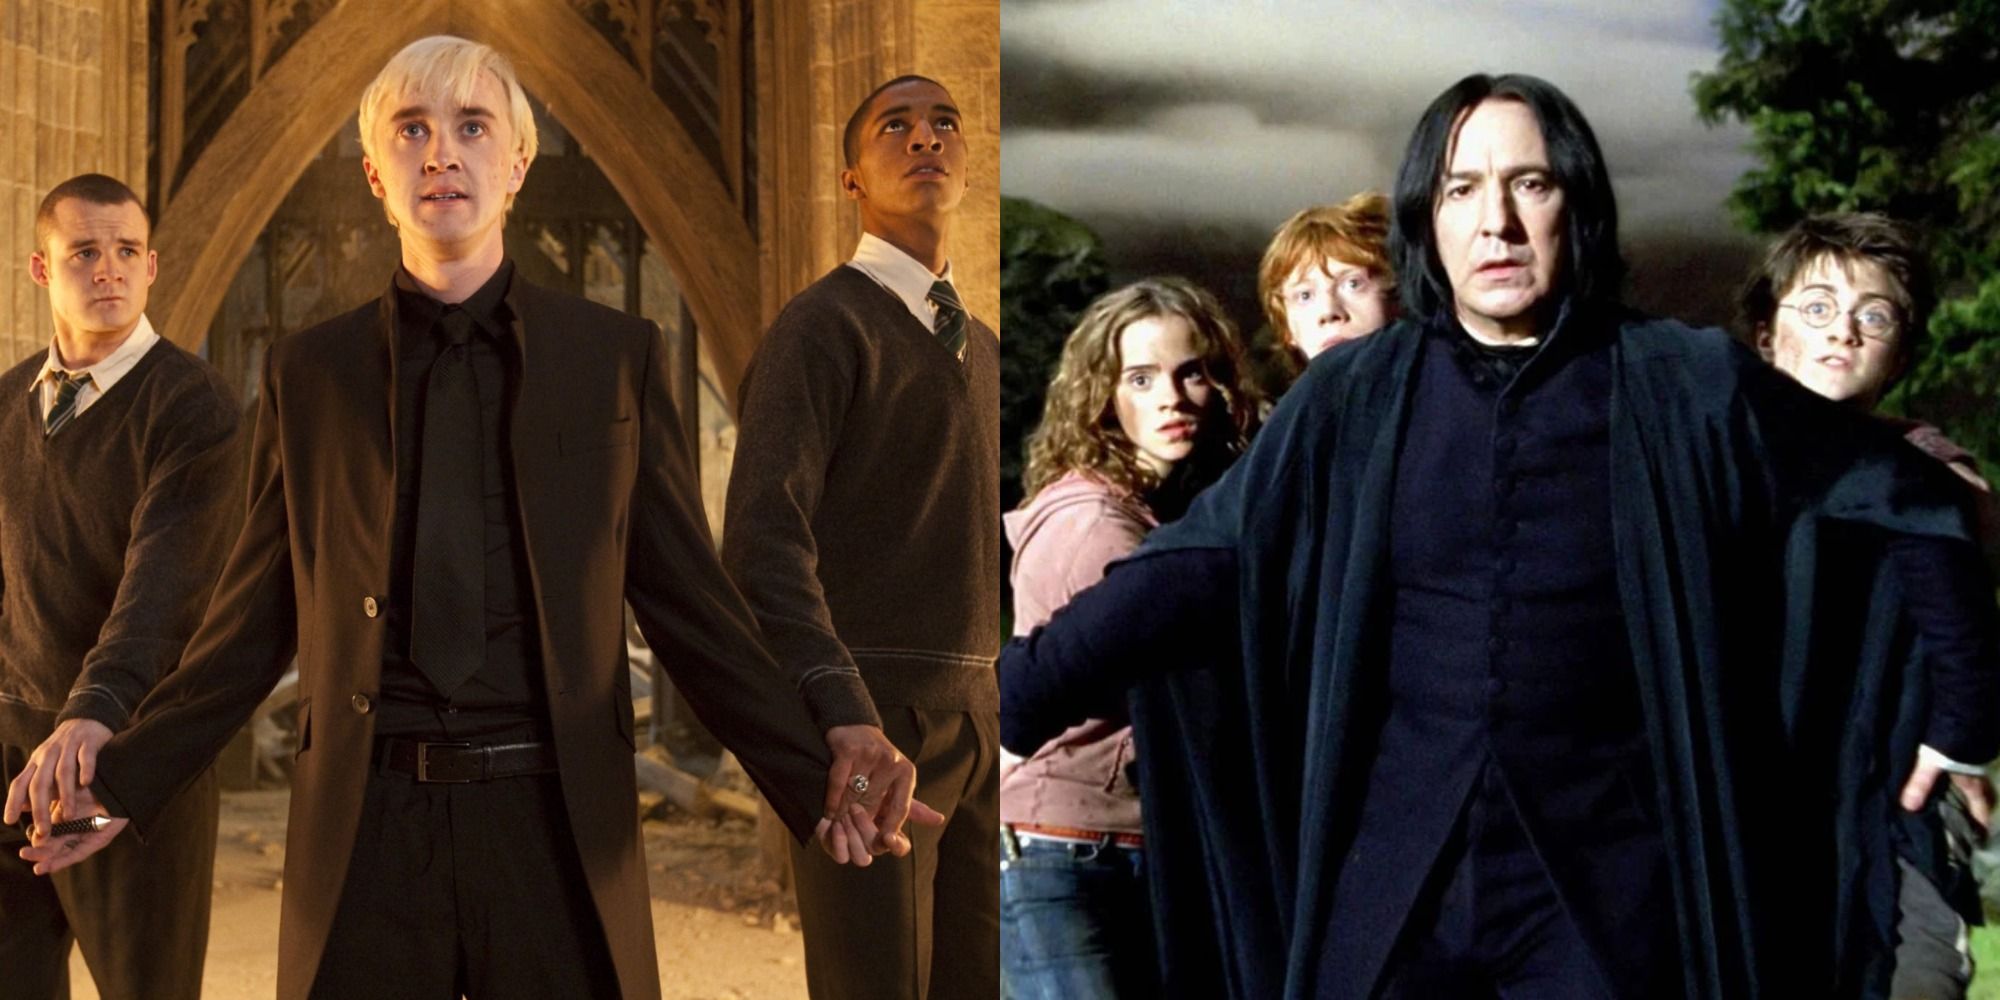 Split image of Draco Malfoy in front of his friends and Snape protecting Harry, Hermione and Ron